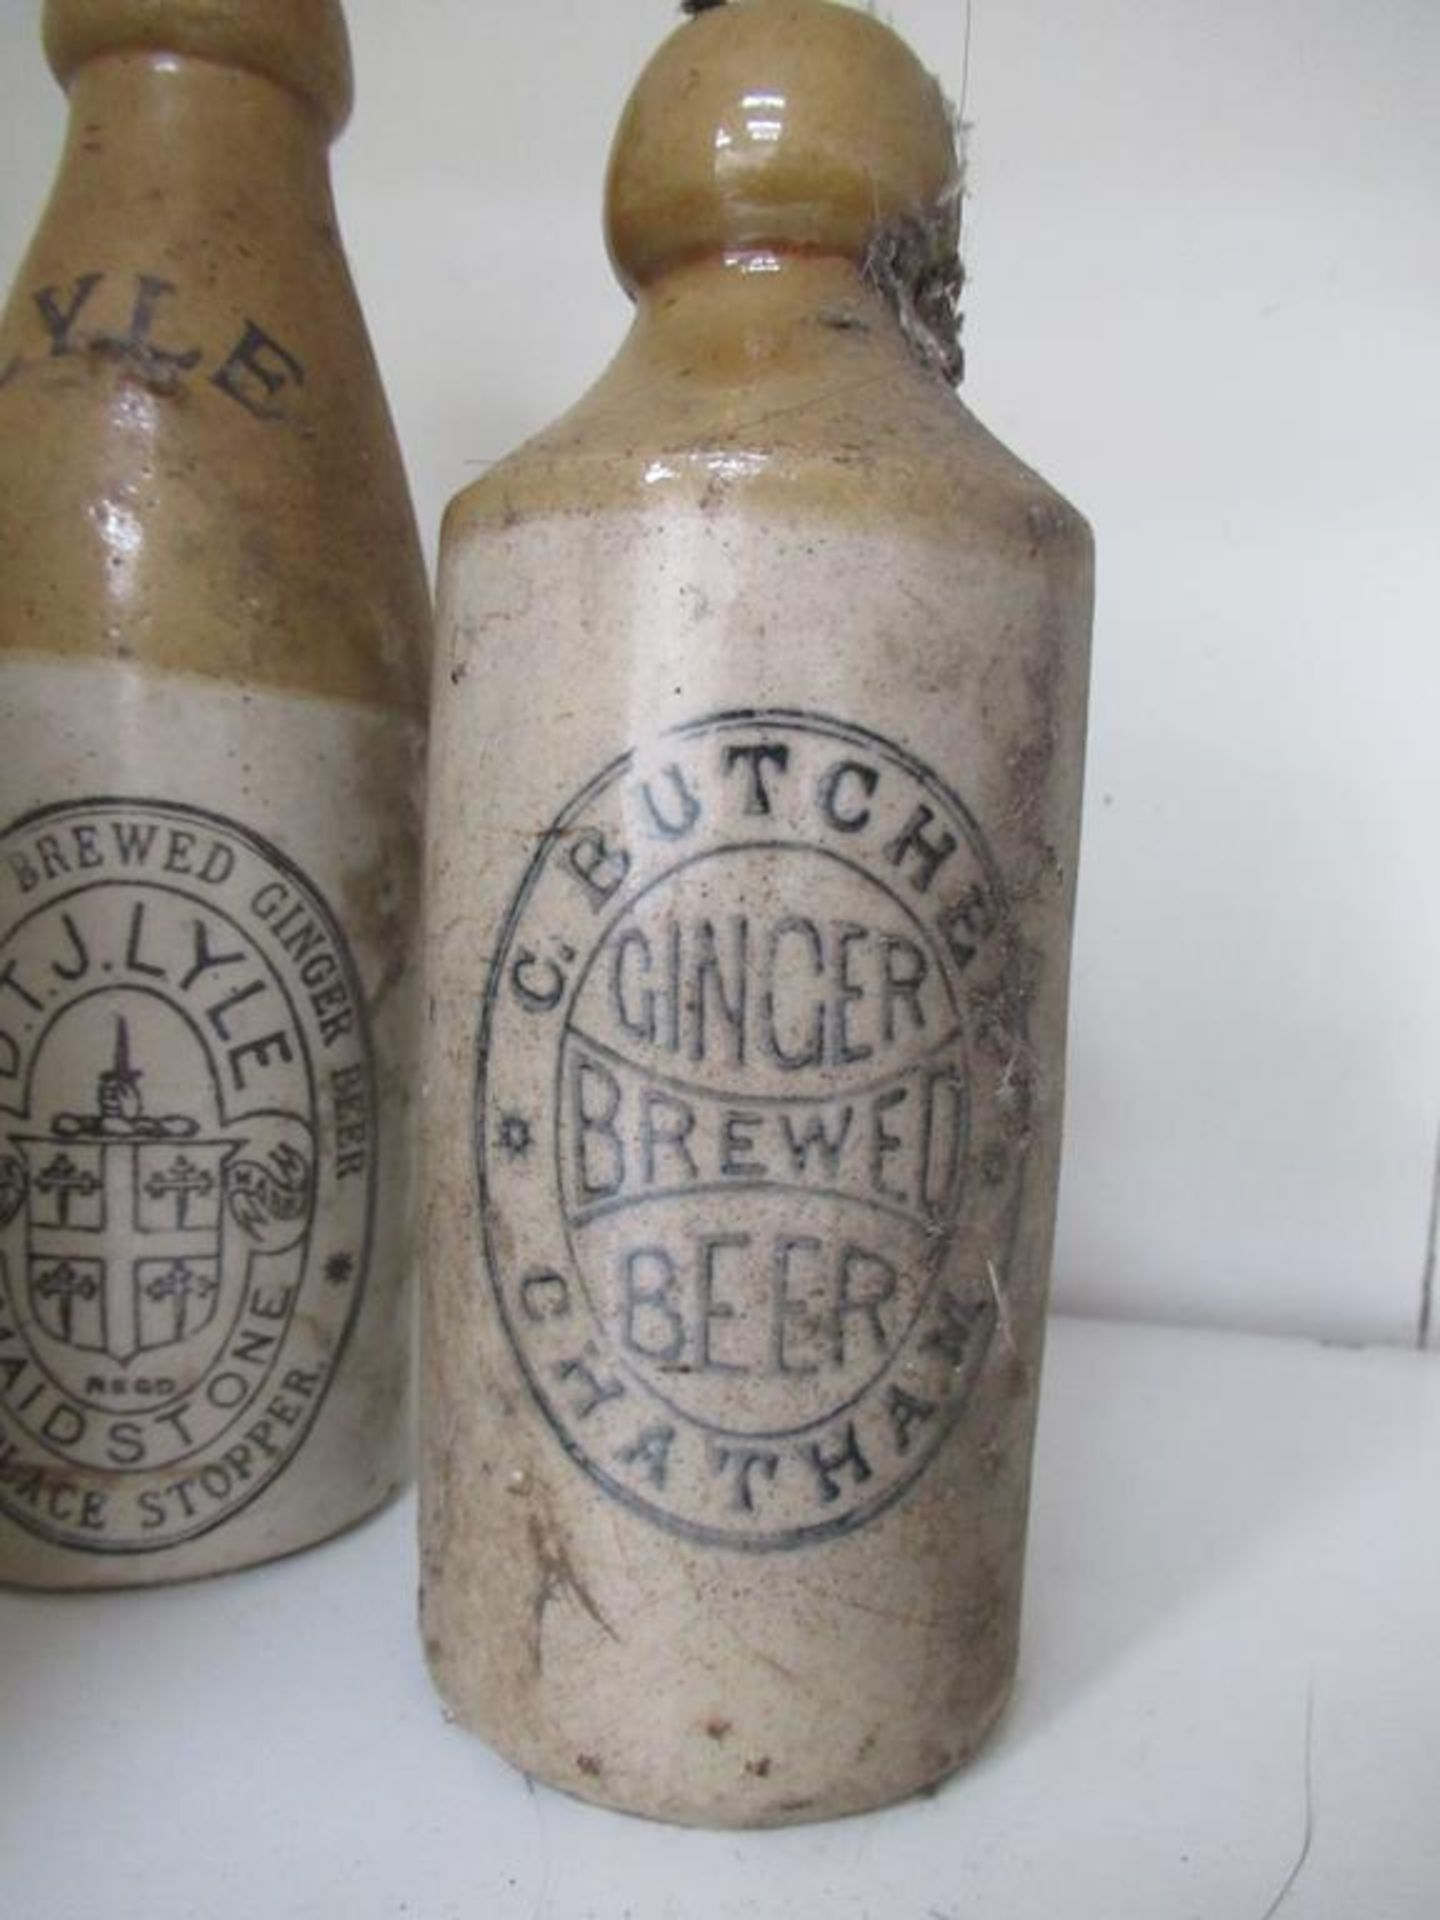 4x Stone Ginger Beer Bottles - W.Biscombe, Plymouth; W.Dove, Rochester; C.Butcher, Chatham; D.T.J Ly - Image 4 of 6